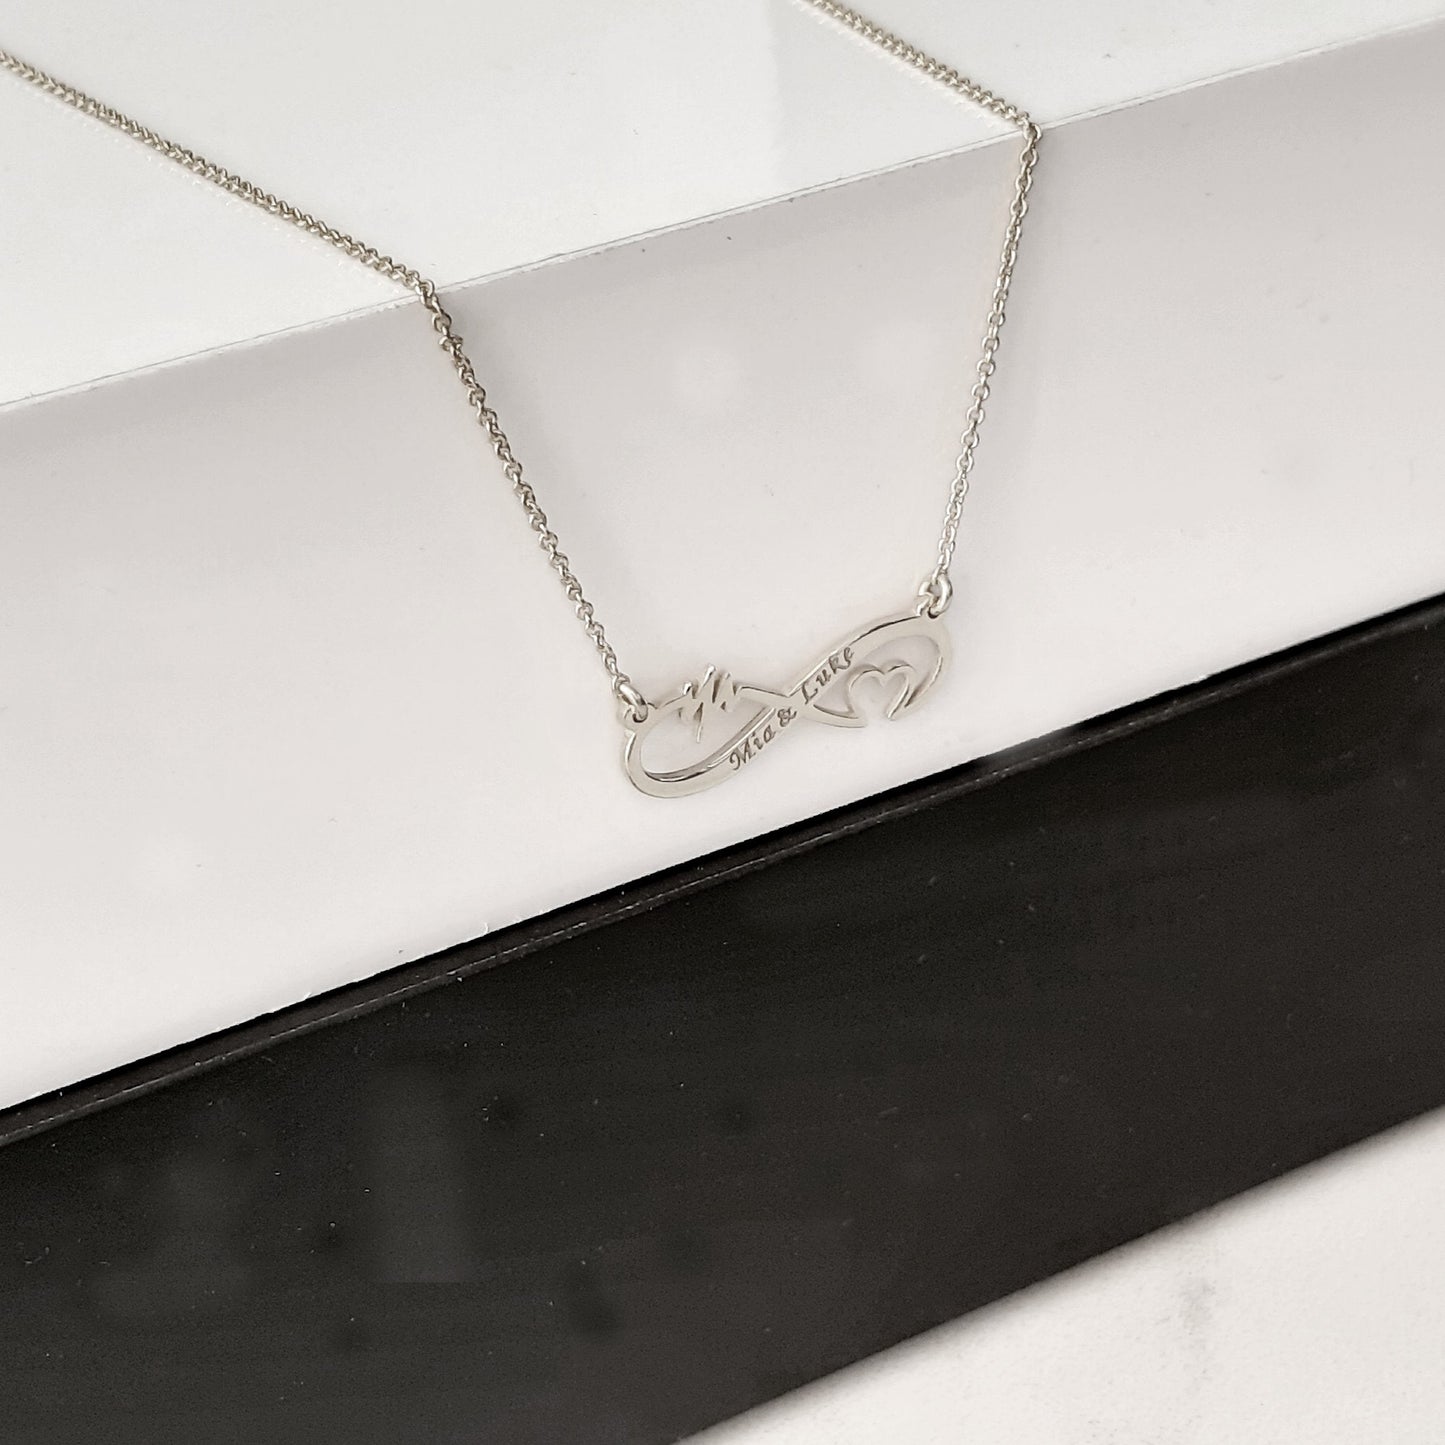 Personalized Infinity Necklace, Custom Name Date Necklace, 14k solid gold Infinity Jewelry, Personalized Gift, Custom Infinity Gift